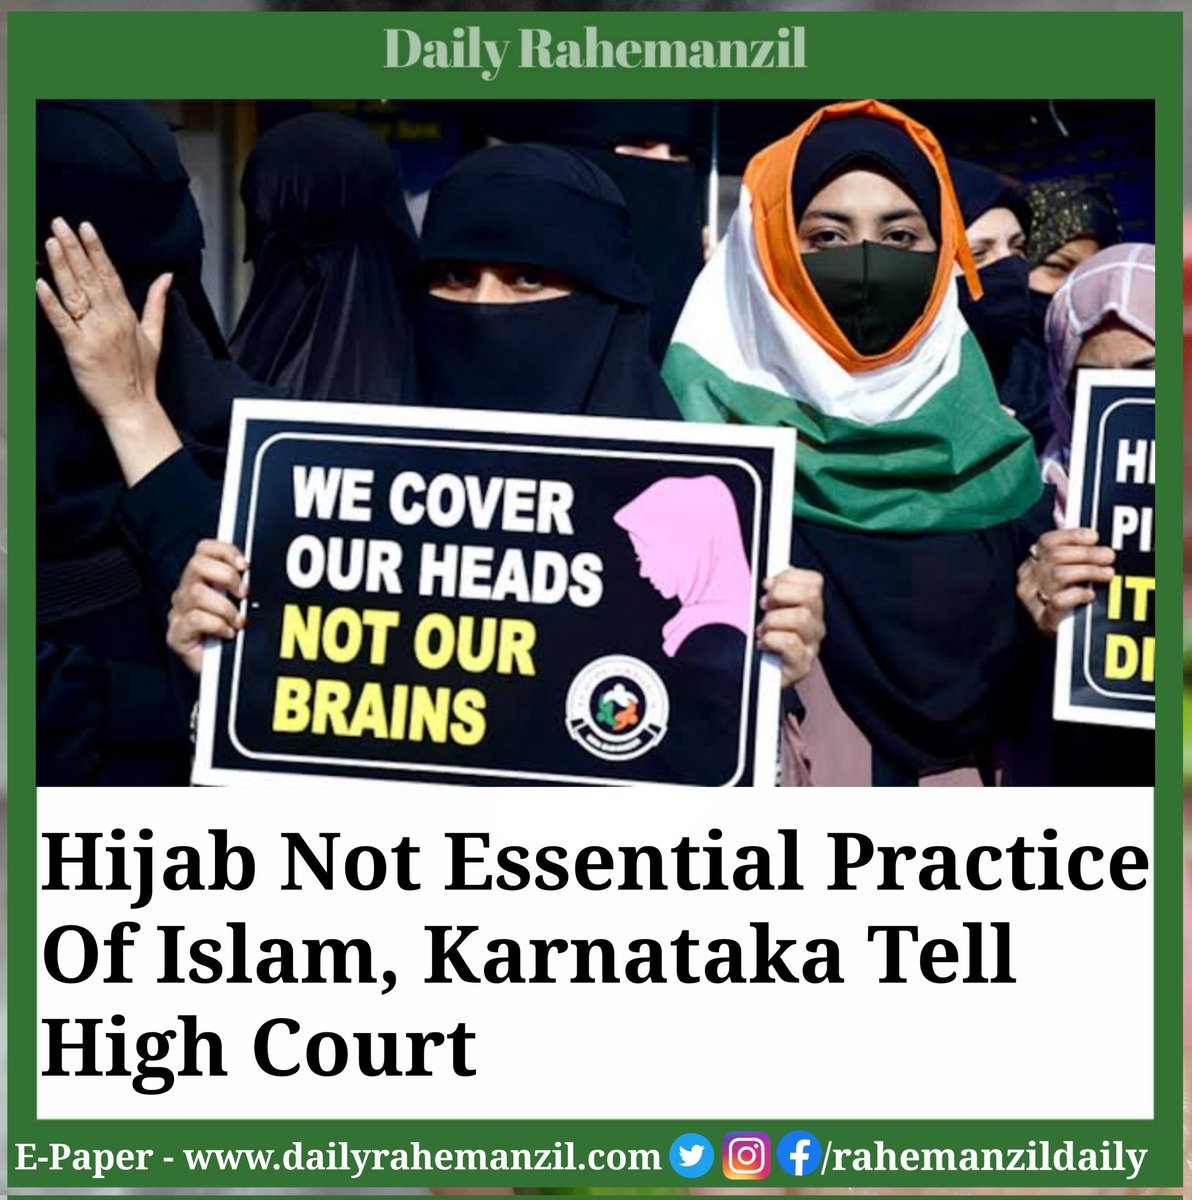 Hijab is not an essential religious practice of Islam and preventing its use does not violate the constitutional guarantee of religious freedom,the Karnataka government contended before the high court on Friday
#Hijabb#religious #practice #religiouspractice #Islam #constitutional